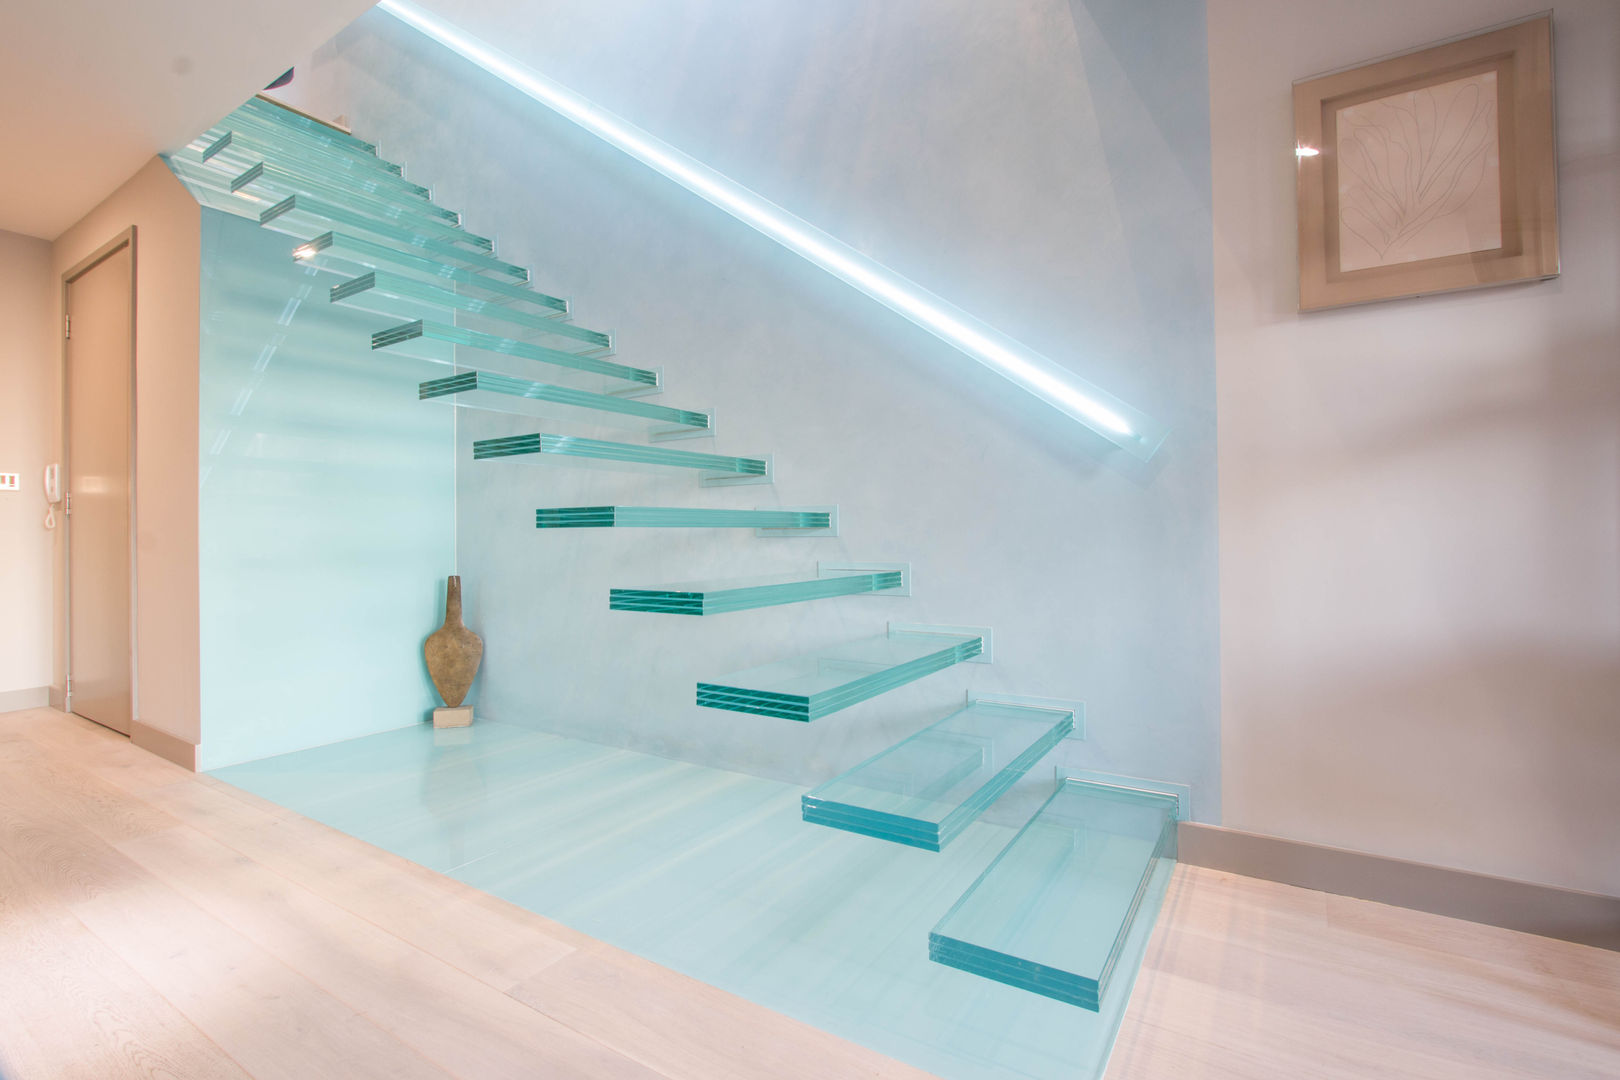 ​A single-flight cantilever staircase crafted in toughened, laminated glass Railing London Ltd Couloir, entrée, escaliers modernes Glass stairs,glass staircases,cantilever stairs,cantilever glass treads,floating glass stairs,floating treads,glass handrail